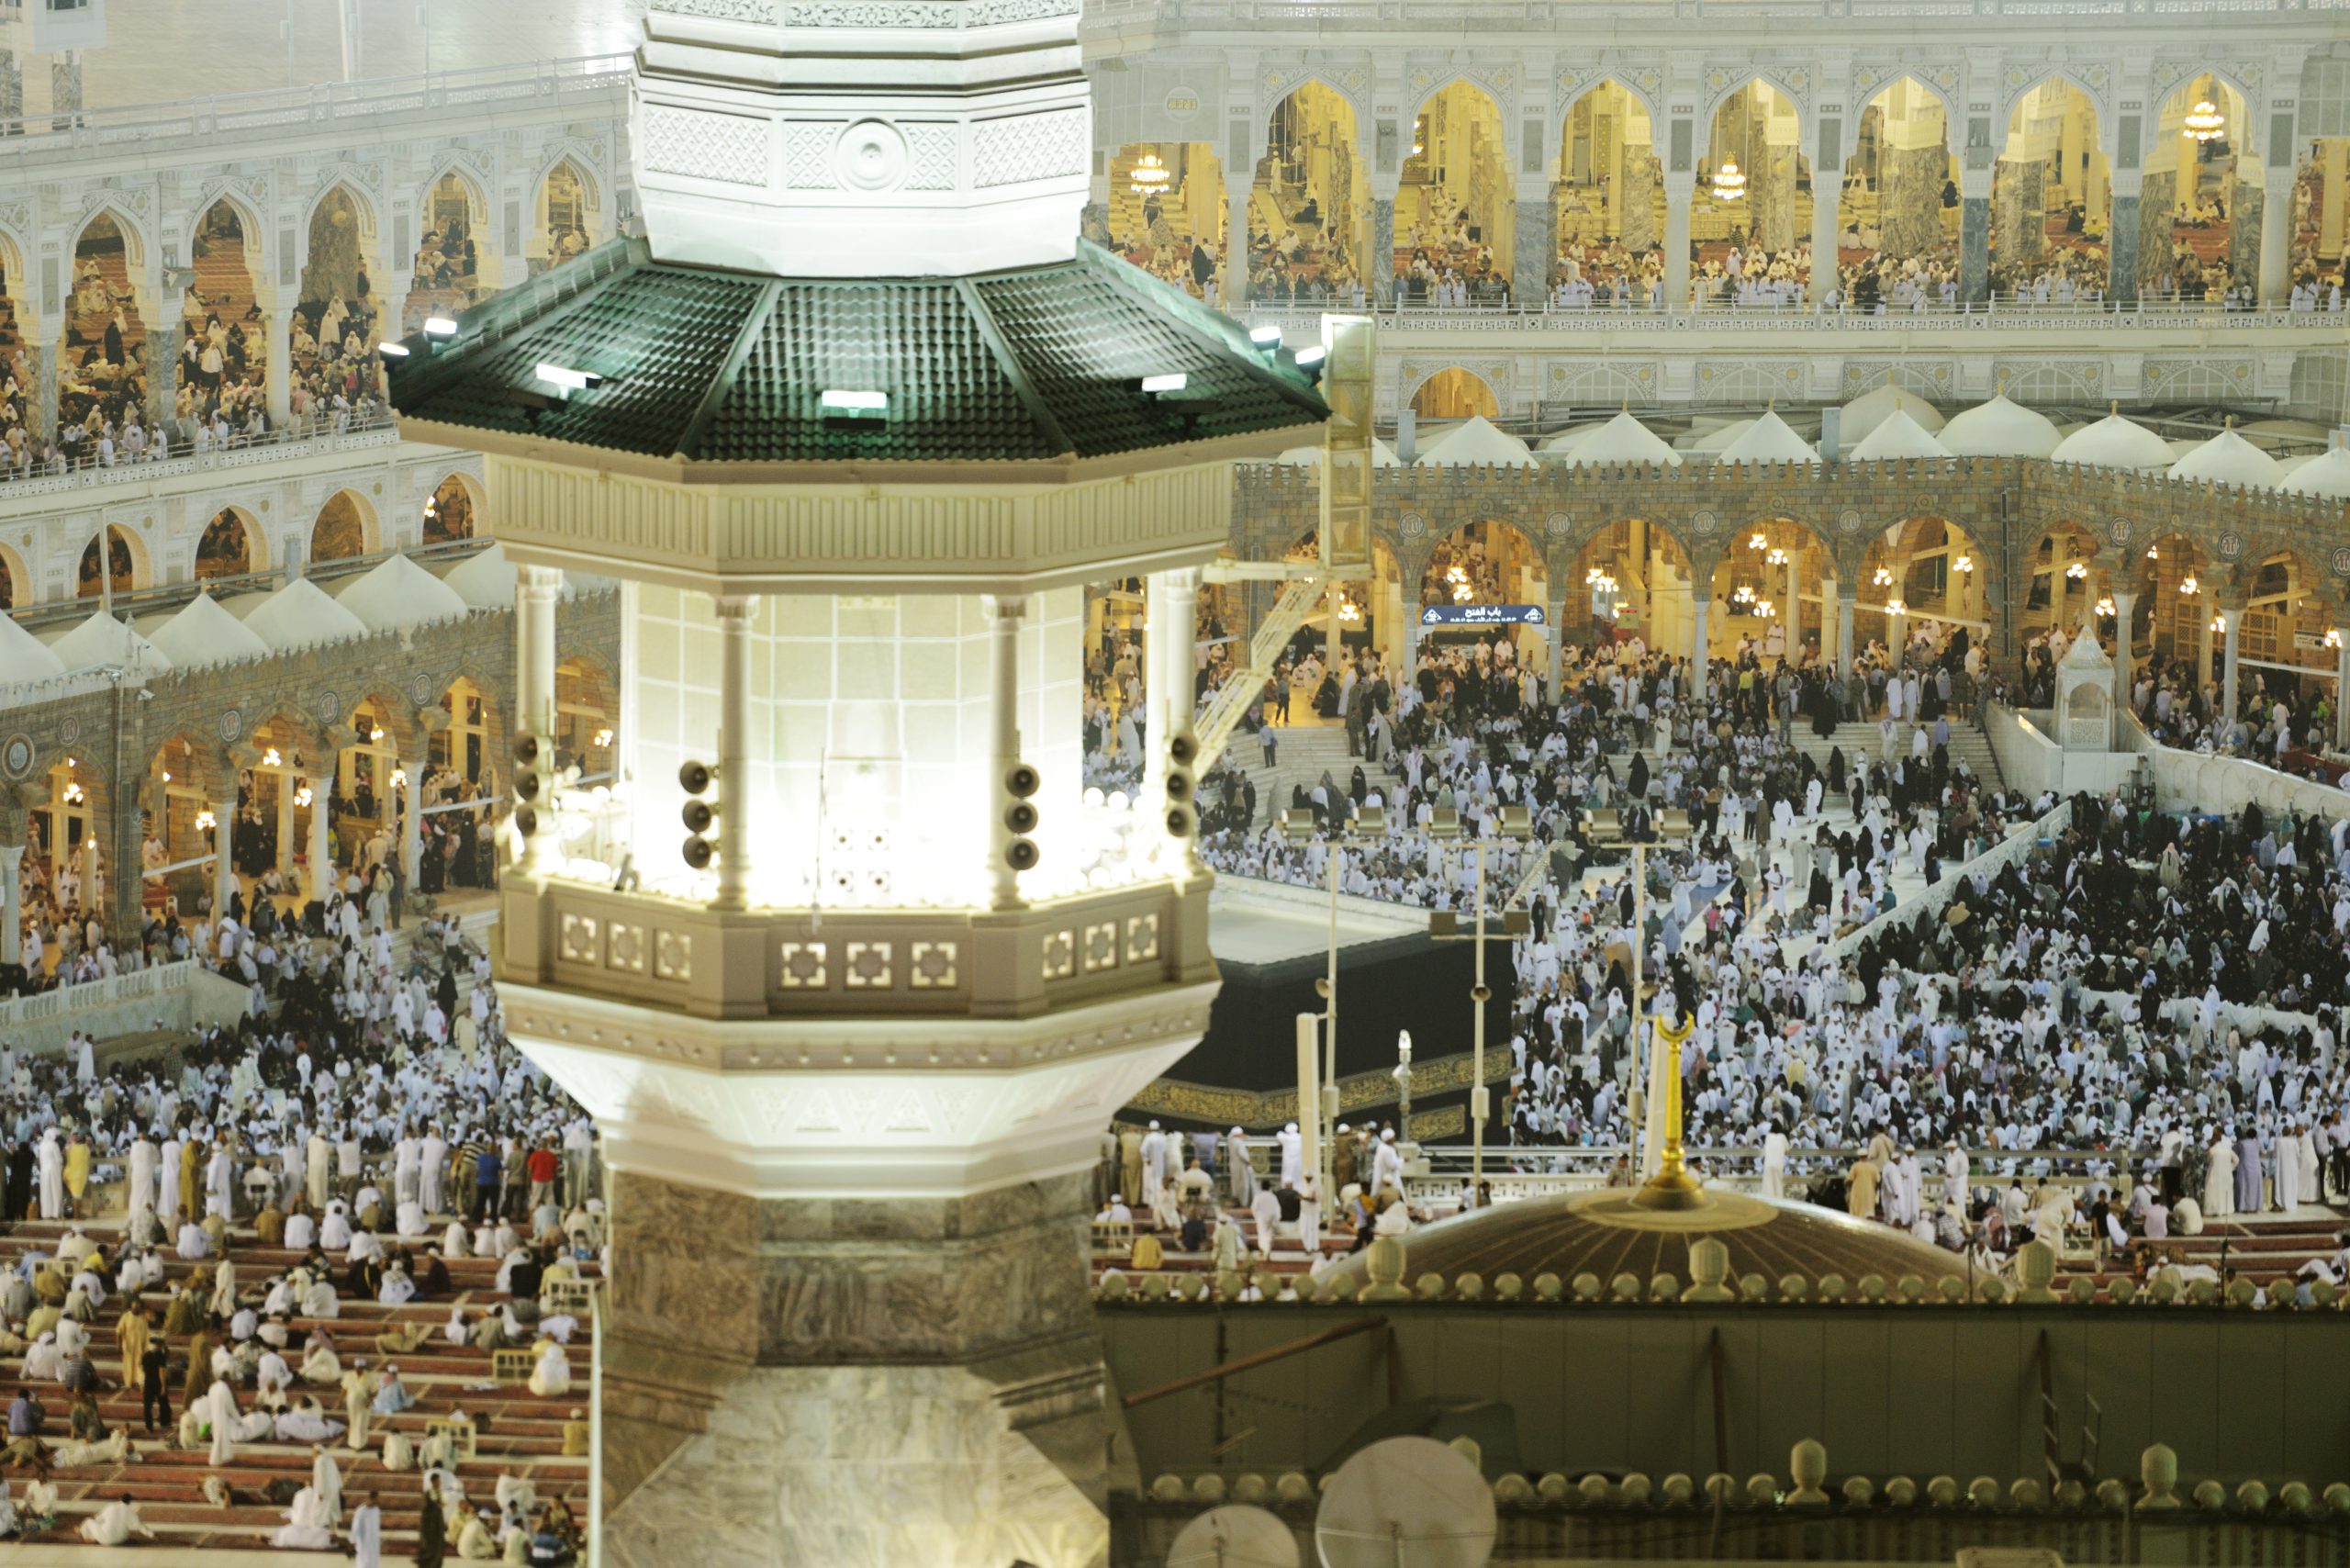 Islamic Holy Place - series of the largest resolution images (more than 30 mpx)